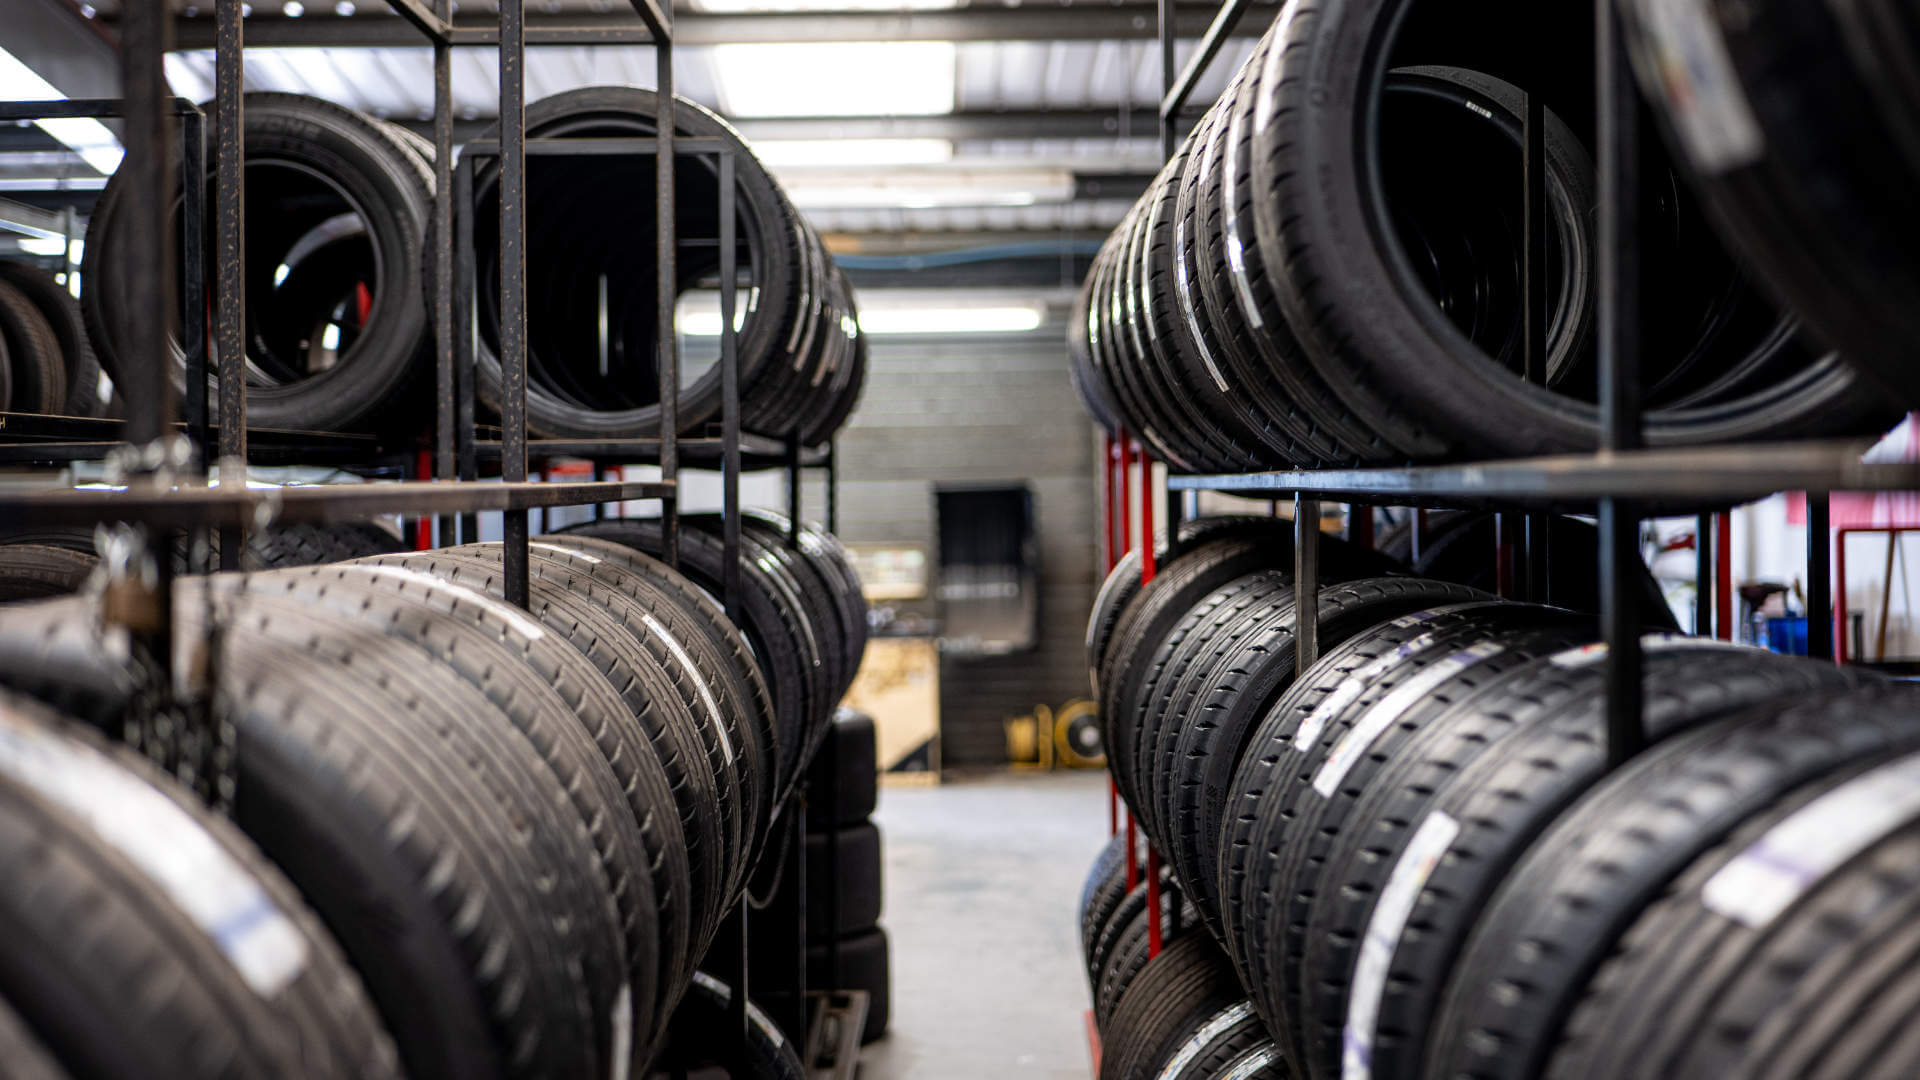 Car tyres sit stacked on shelves